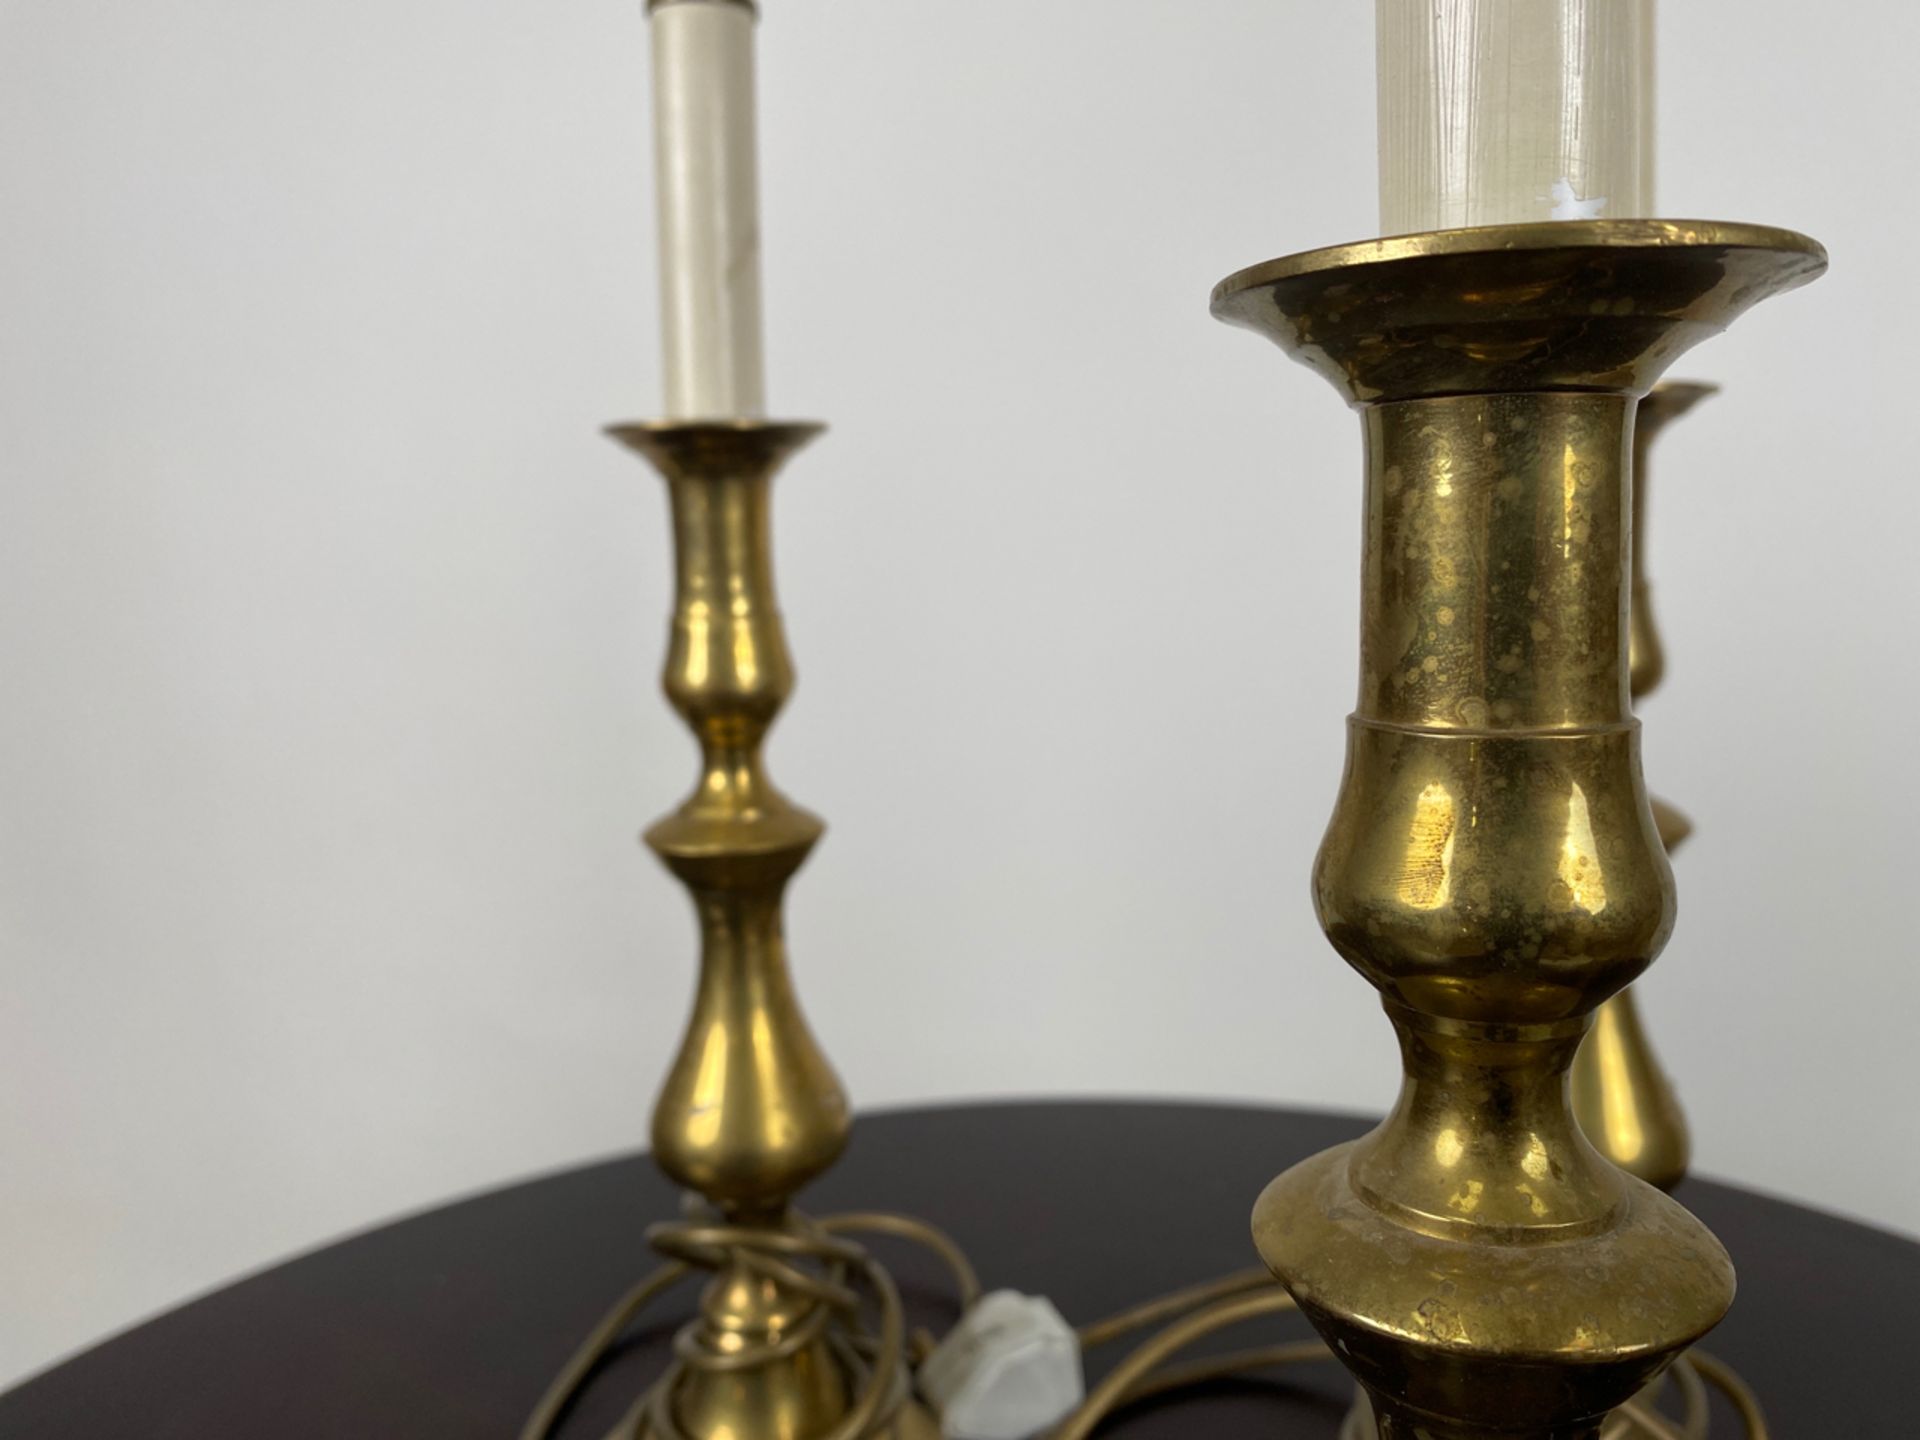 Set of 3 Brass Table Lamps - Image 3 of 3